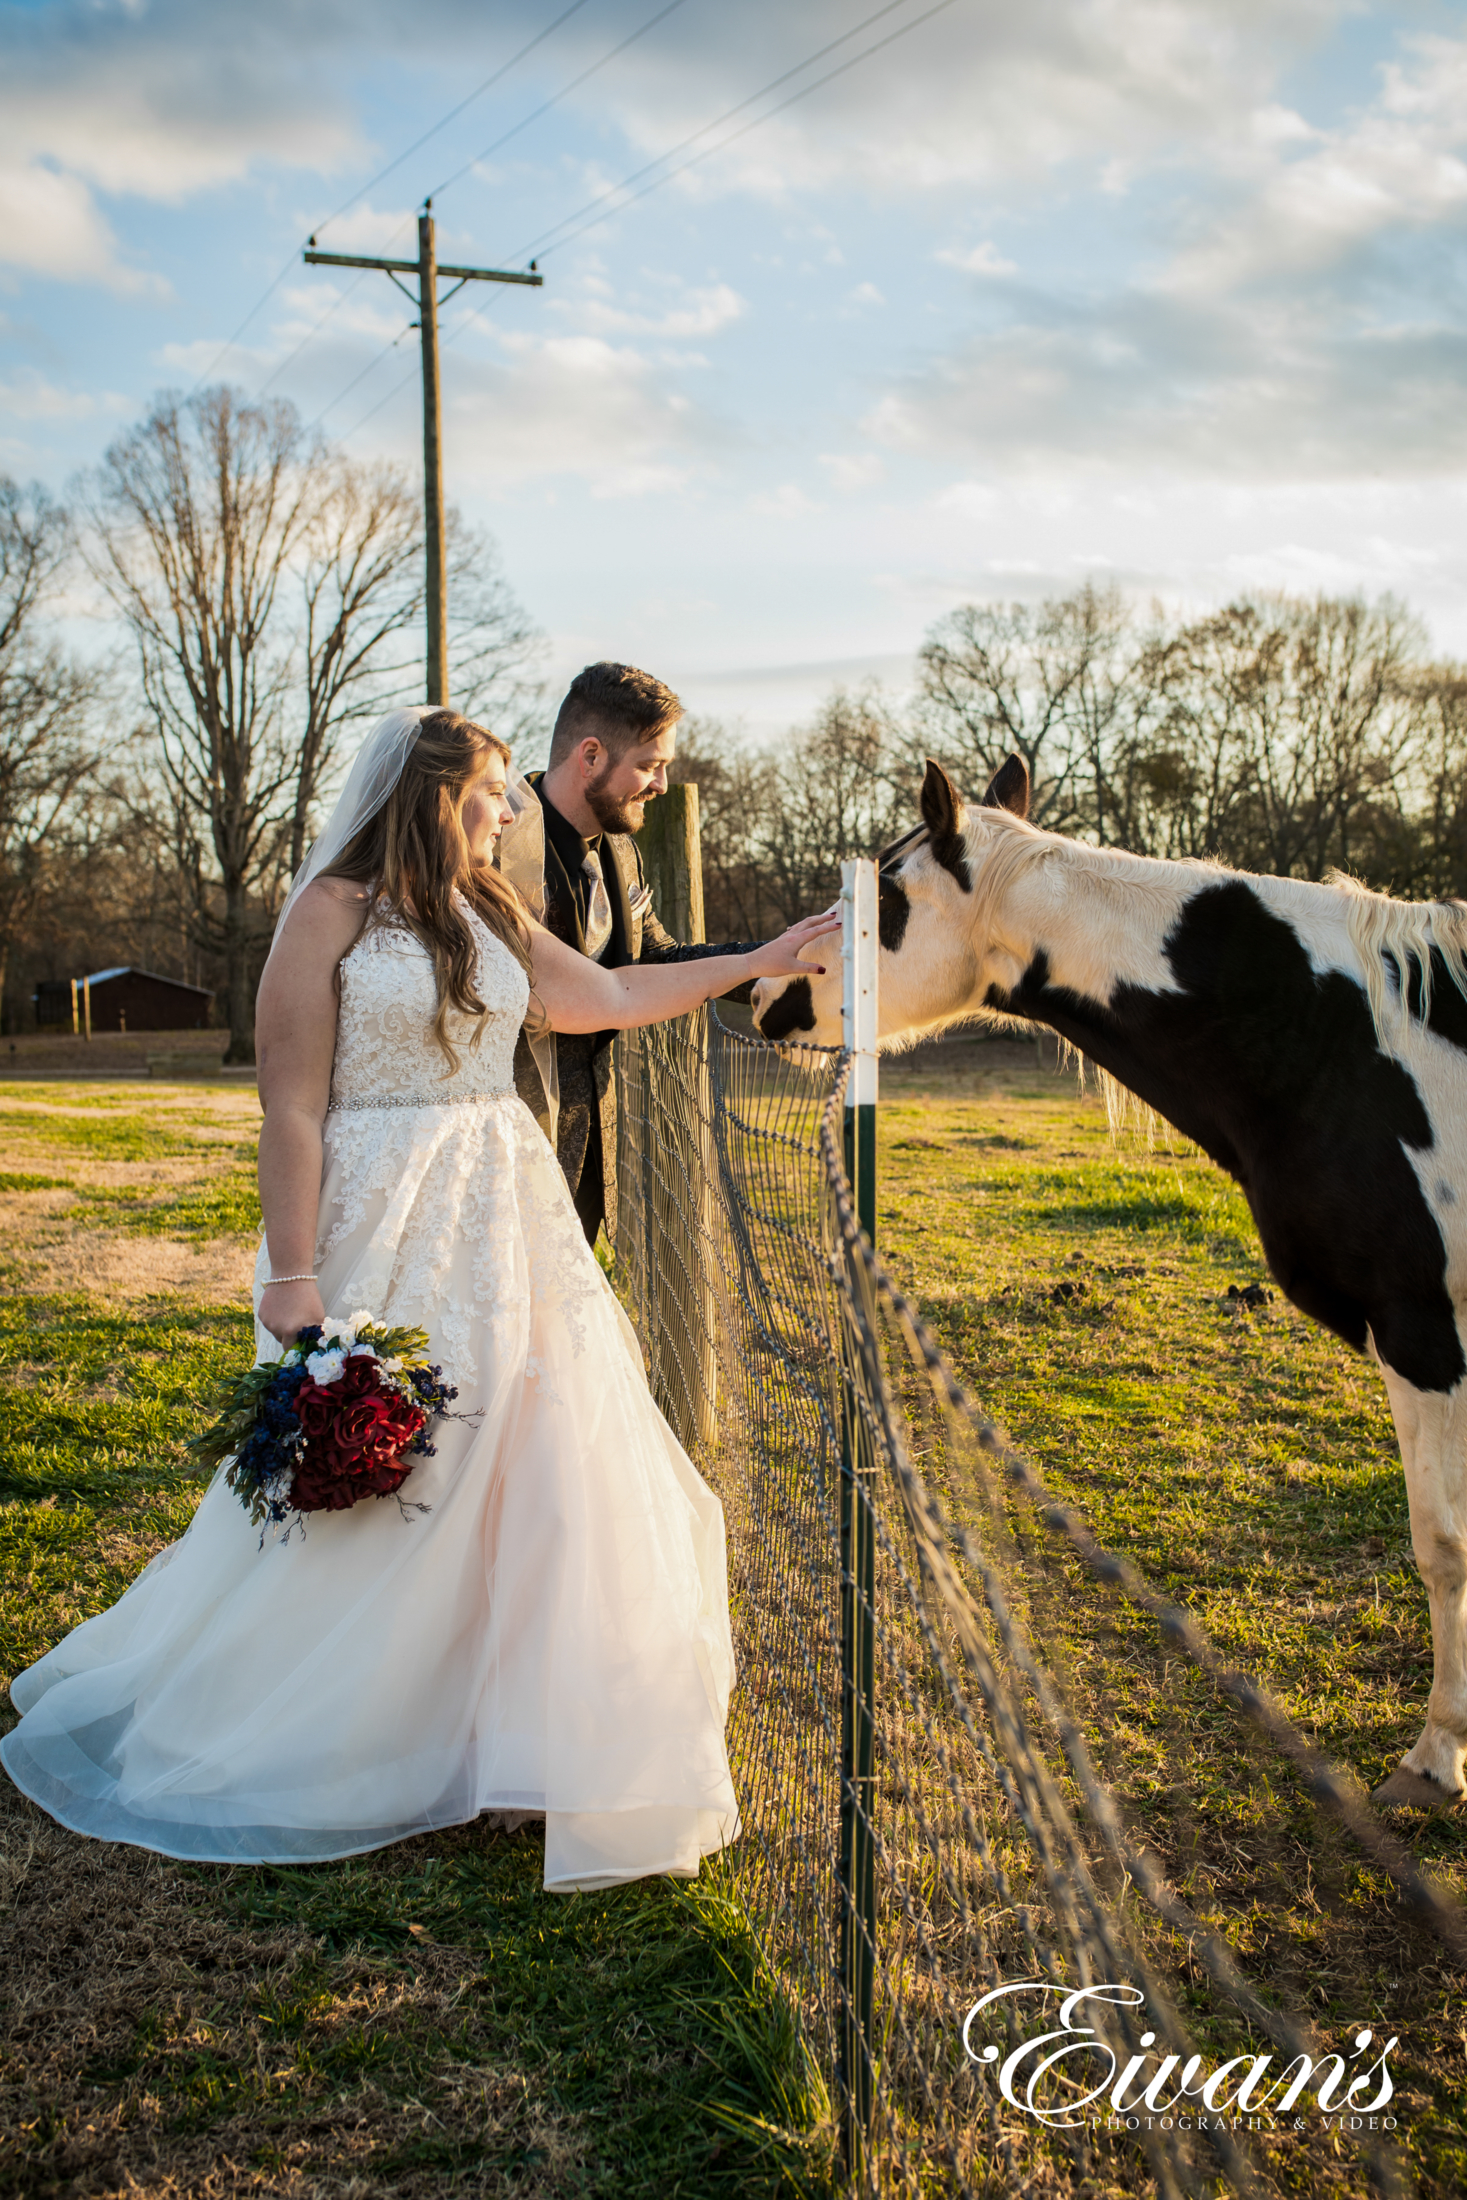 How to Have a Country Chic Wedding